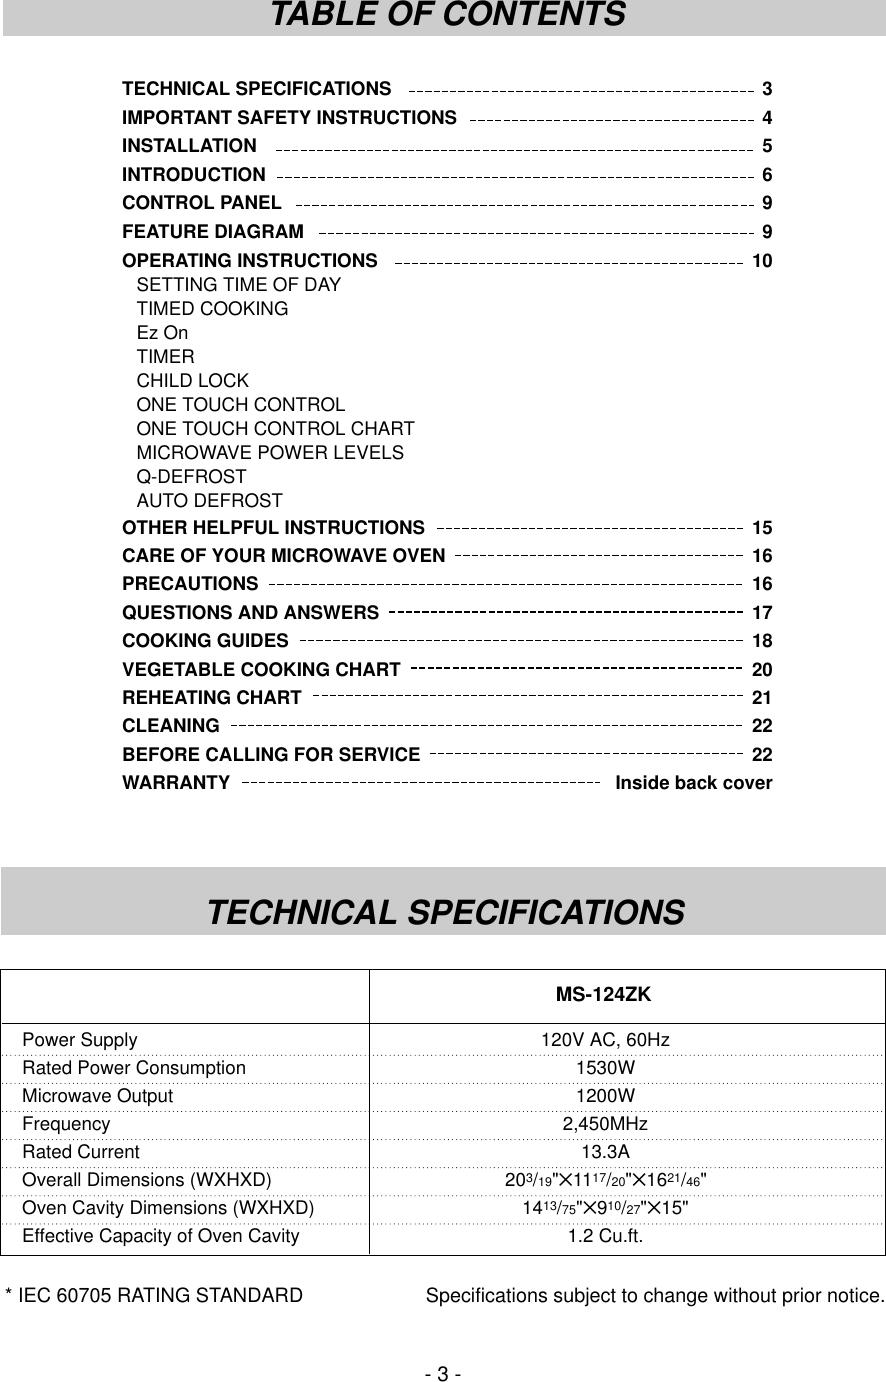 TECHNICAL SPECIFICATIONS 3IMPORTANT SAFETY INSTRUCTIONS 4INSTALLATION 5INTRODUCTION 6CONTROL PANEL 9FEATURE DIAGRAM 9OPERATING INSTRUCTIONS 10SETTING TIME OF DAYTIMED COOKINGEz OnTIMERCHILD LOCKONE TOUCH CONTROLONE TOUCH CONTROL CHARTMICROWAVE POWER LEVELSQ-DEFROSTAUTO DEFROSTOTHER HELPFUL INSTRUCTIONS 15CARE OF YOUR MICROWAVE OVEN 16PRECAUTIONS 16QUESTIONS AND ANSWERS 17COOKING GUIDES 18VEGETABLE COOKING CHART 20REHEATING CHART 21CLEANING 22BEFORE CALLING FOR SERVICE 22WARRANTY  Inside back cover- 3 -TABLE OF CONTENTSTECHNICAL SPECIFICATIONS* IEC 60705 RATING STANDARD Specifications subject to change without prior notice.Power Supply 120V AC, 60HzRated Power Consumption 1530WMicrowave Output 1200WFrequency 2,450MHzRated Current 13.3AOverall Dimensions (WXHXD) 203/19&quot;✕1117/20&quot;✕1621/46&quot;Oven Cavity Dimensions (WXHXD) 1413/75&quot;✕910/27&quot;✕15&quot;Effective Capacity of Oven Cavity 1.2 Cu.ft.MS-124ZK